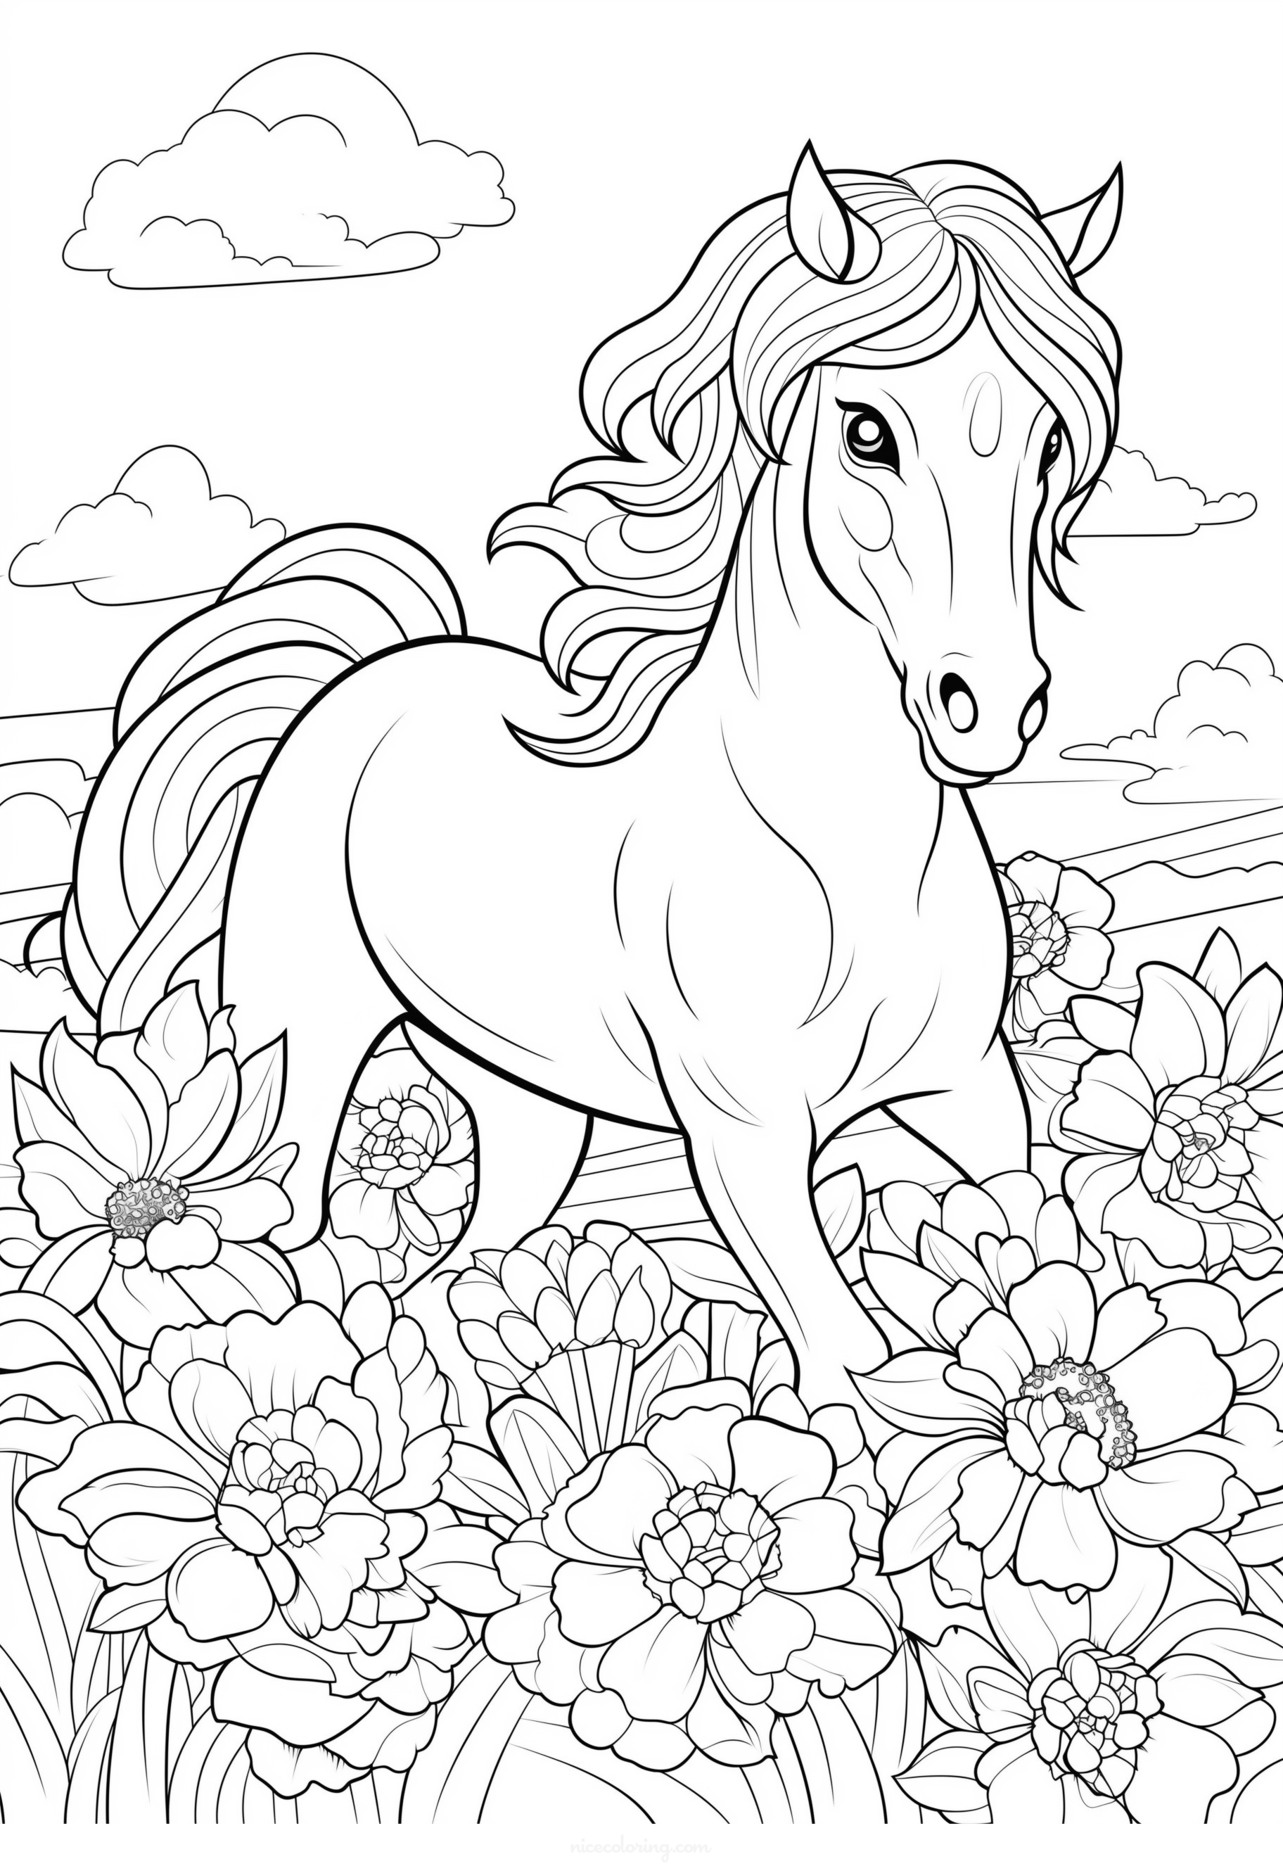 Majestic horse standing in a field coloring page